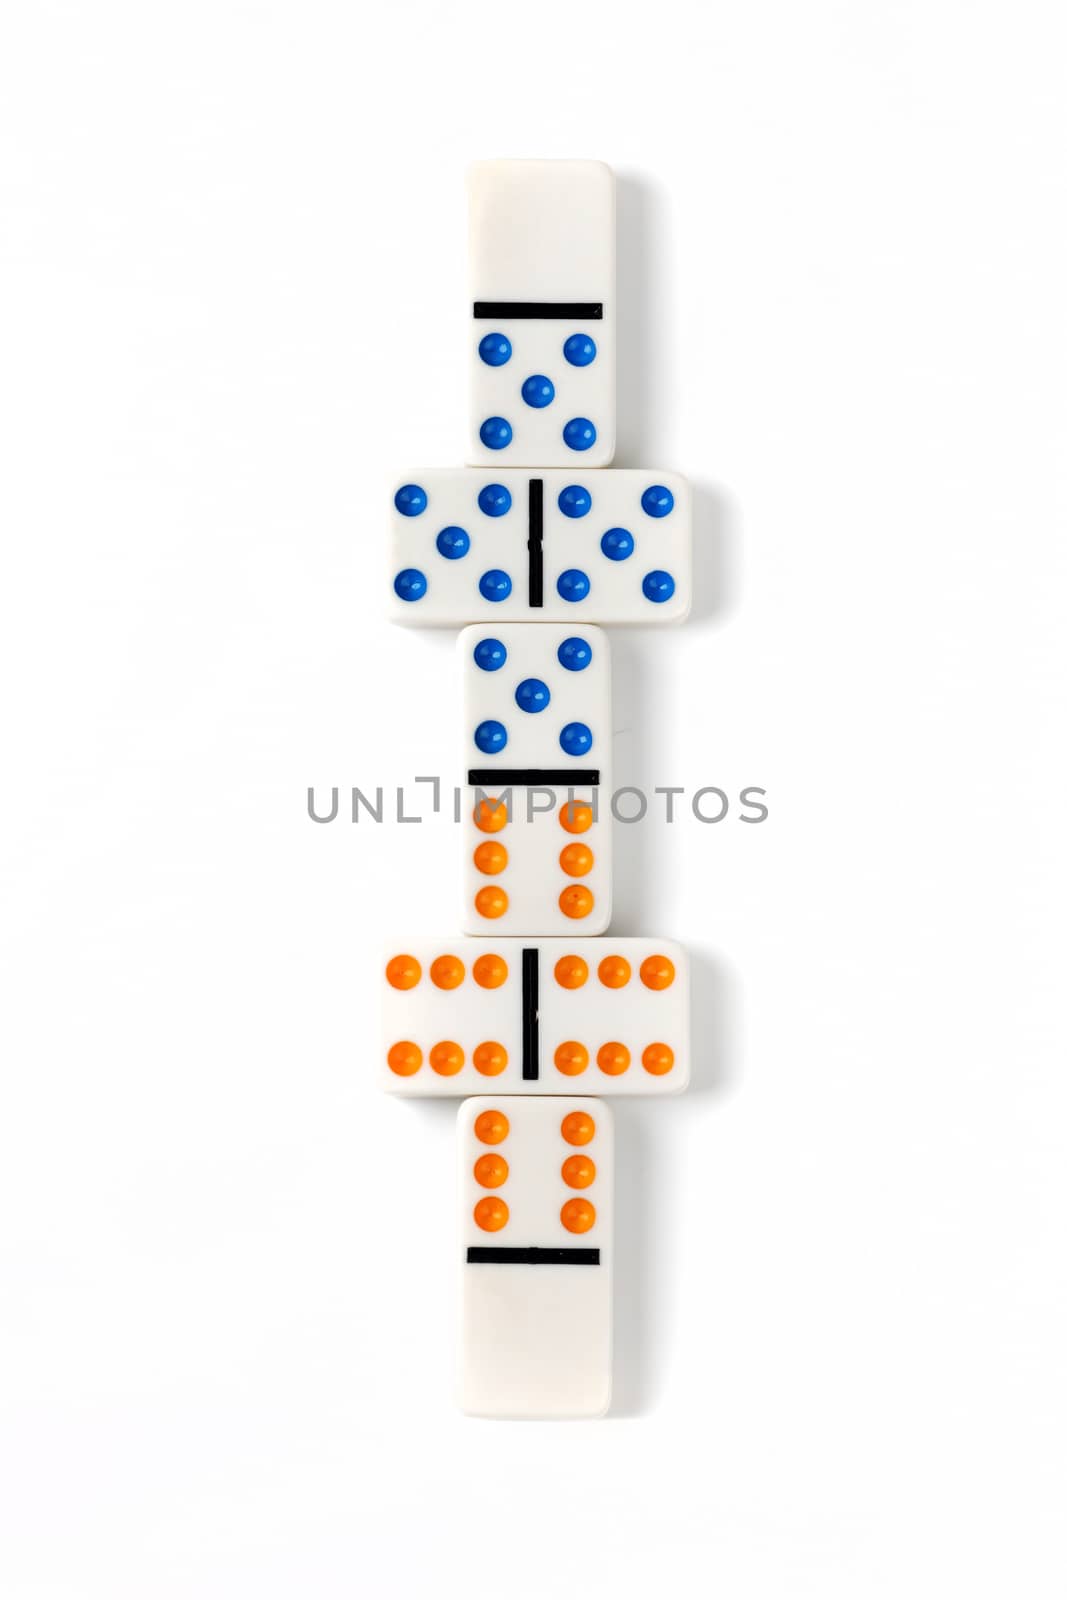 Some colorful dominoes arranged on a white surface